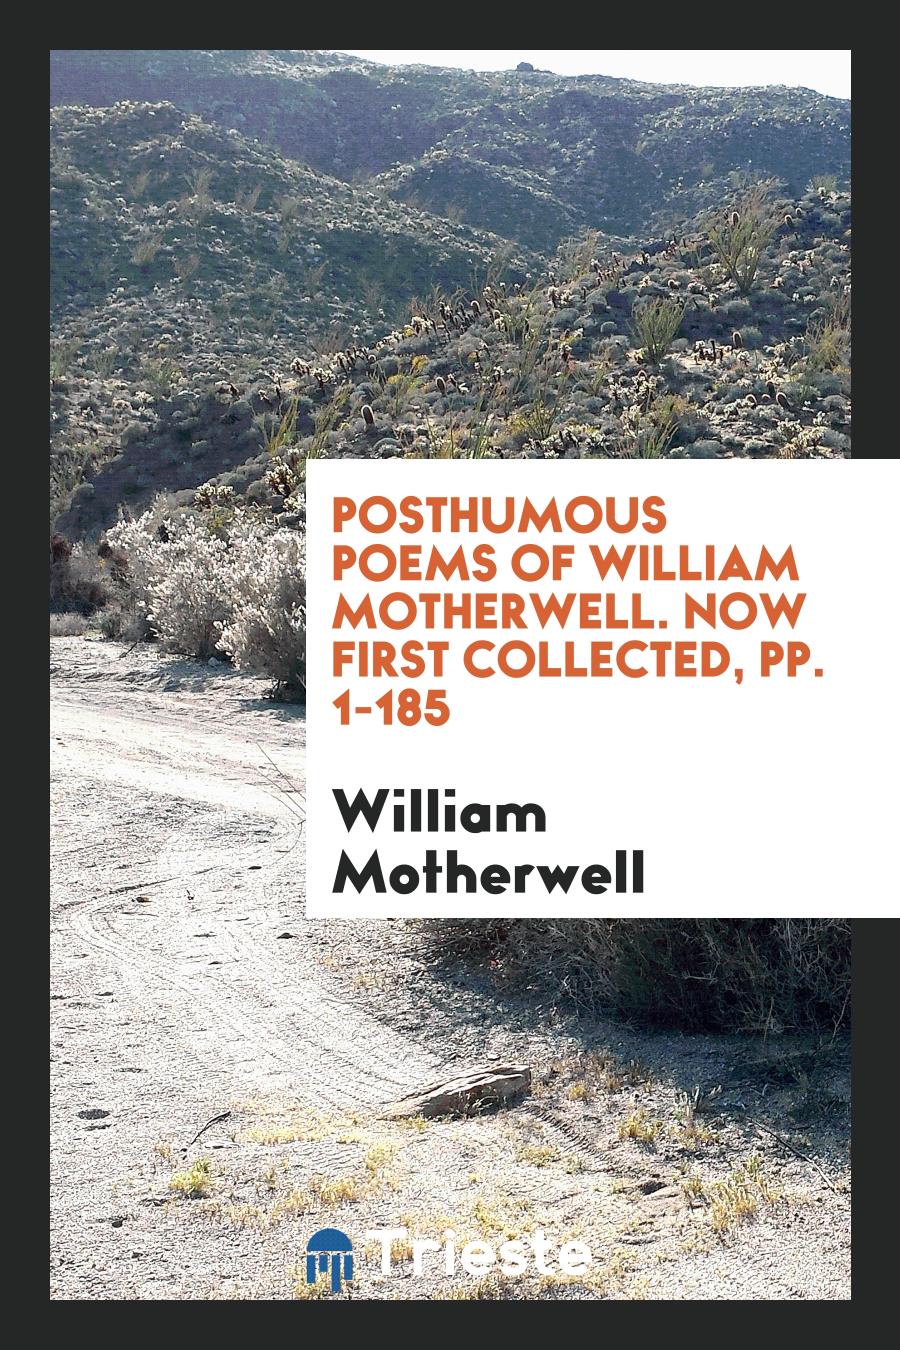 Posthumous Poems of William Motherwell. Now First Collected, pp. 1-185